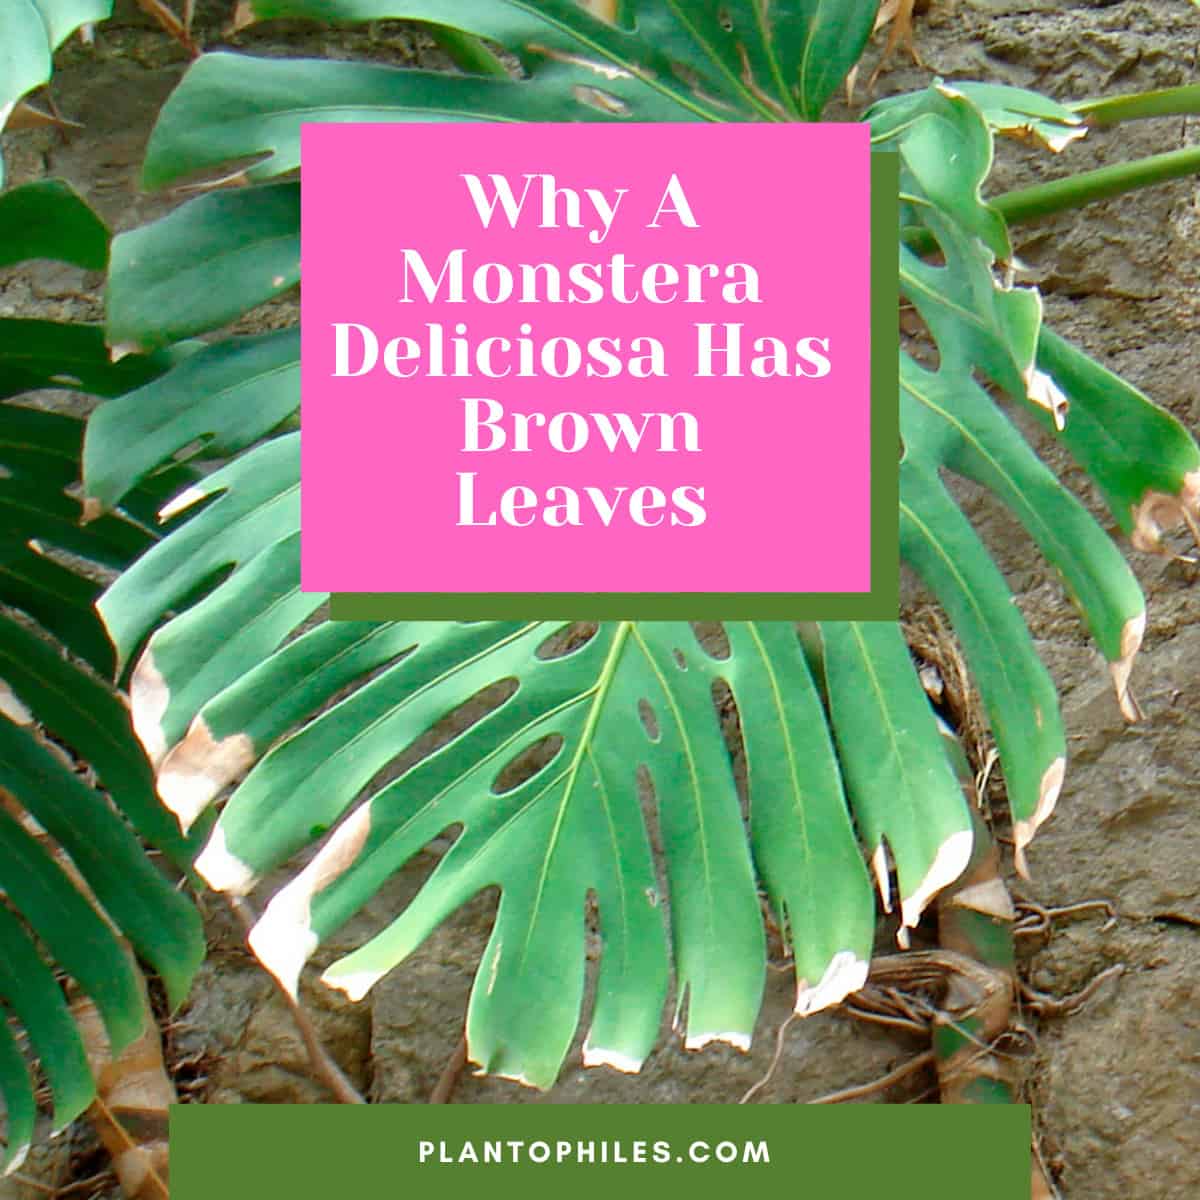 Why A Monstera Deliciosa Has Brown Leaves